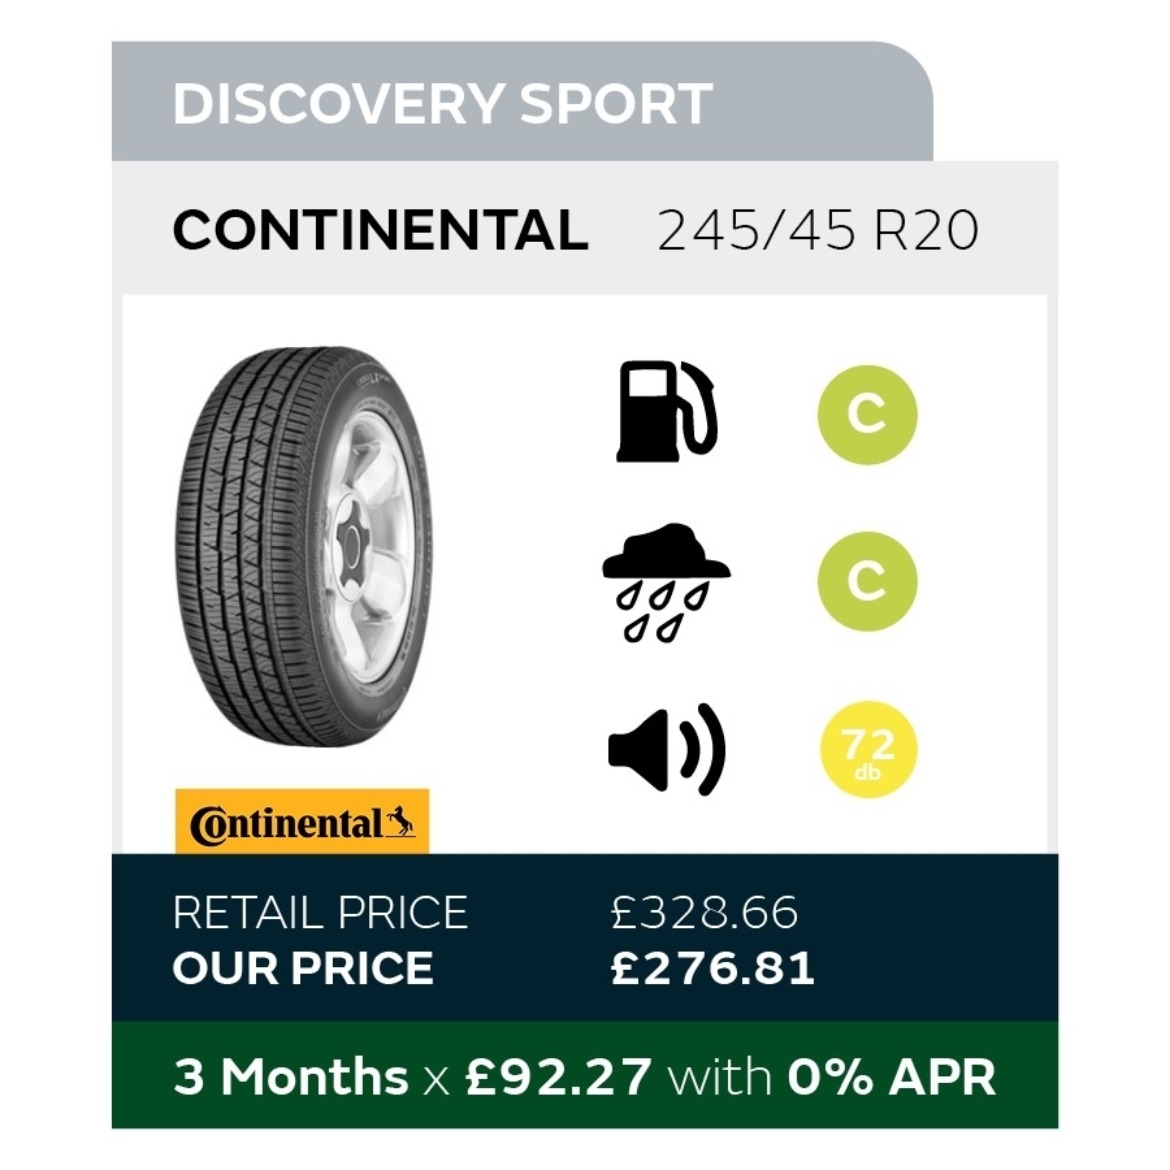 Discovery Sport Tyre Offer